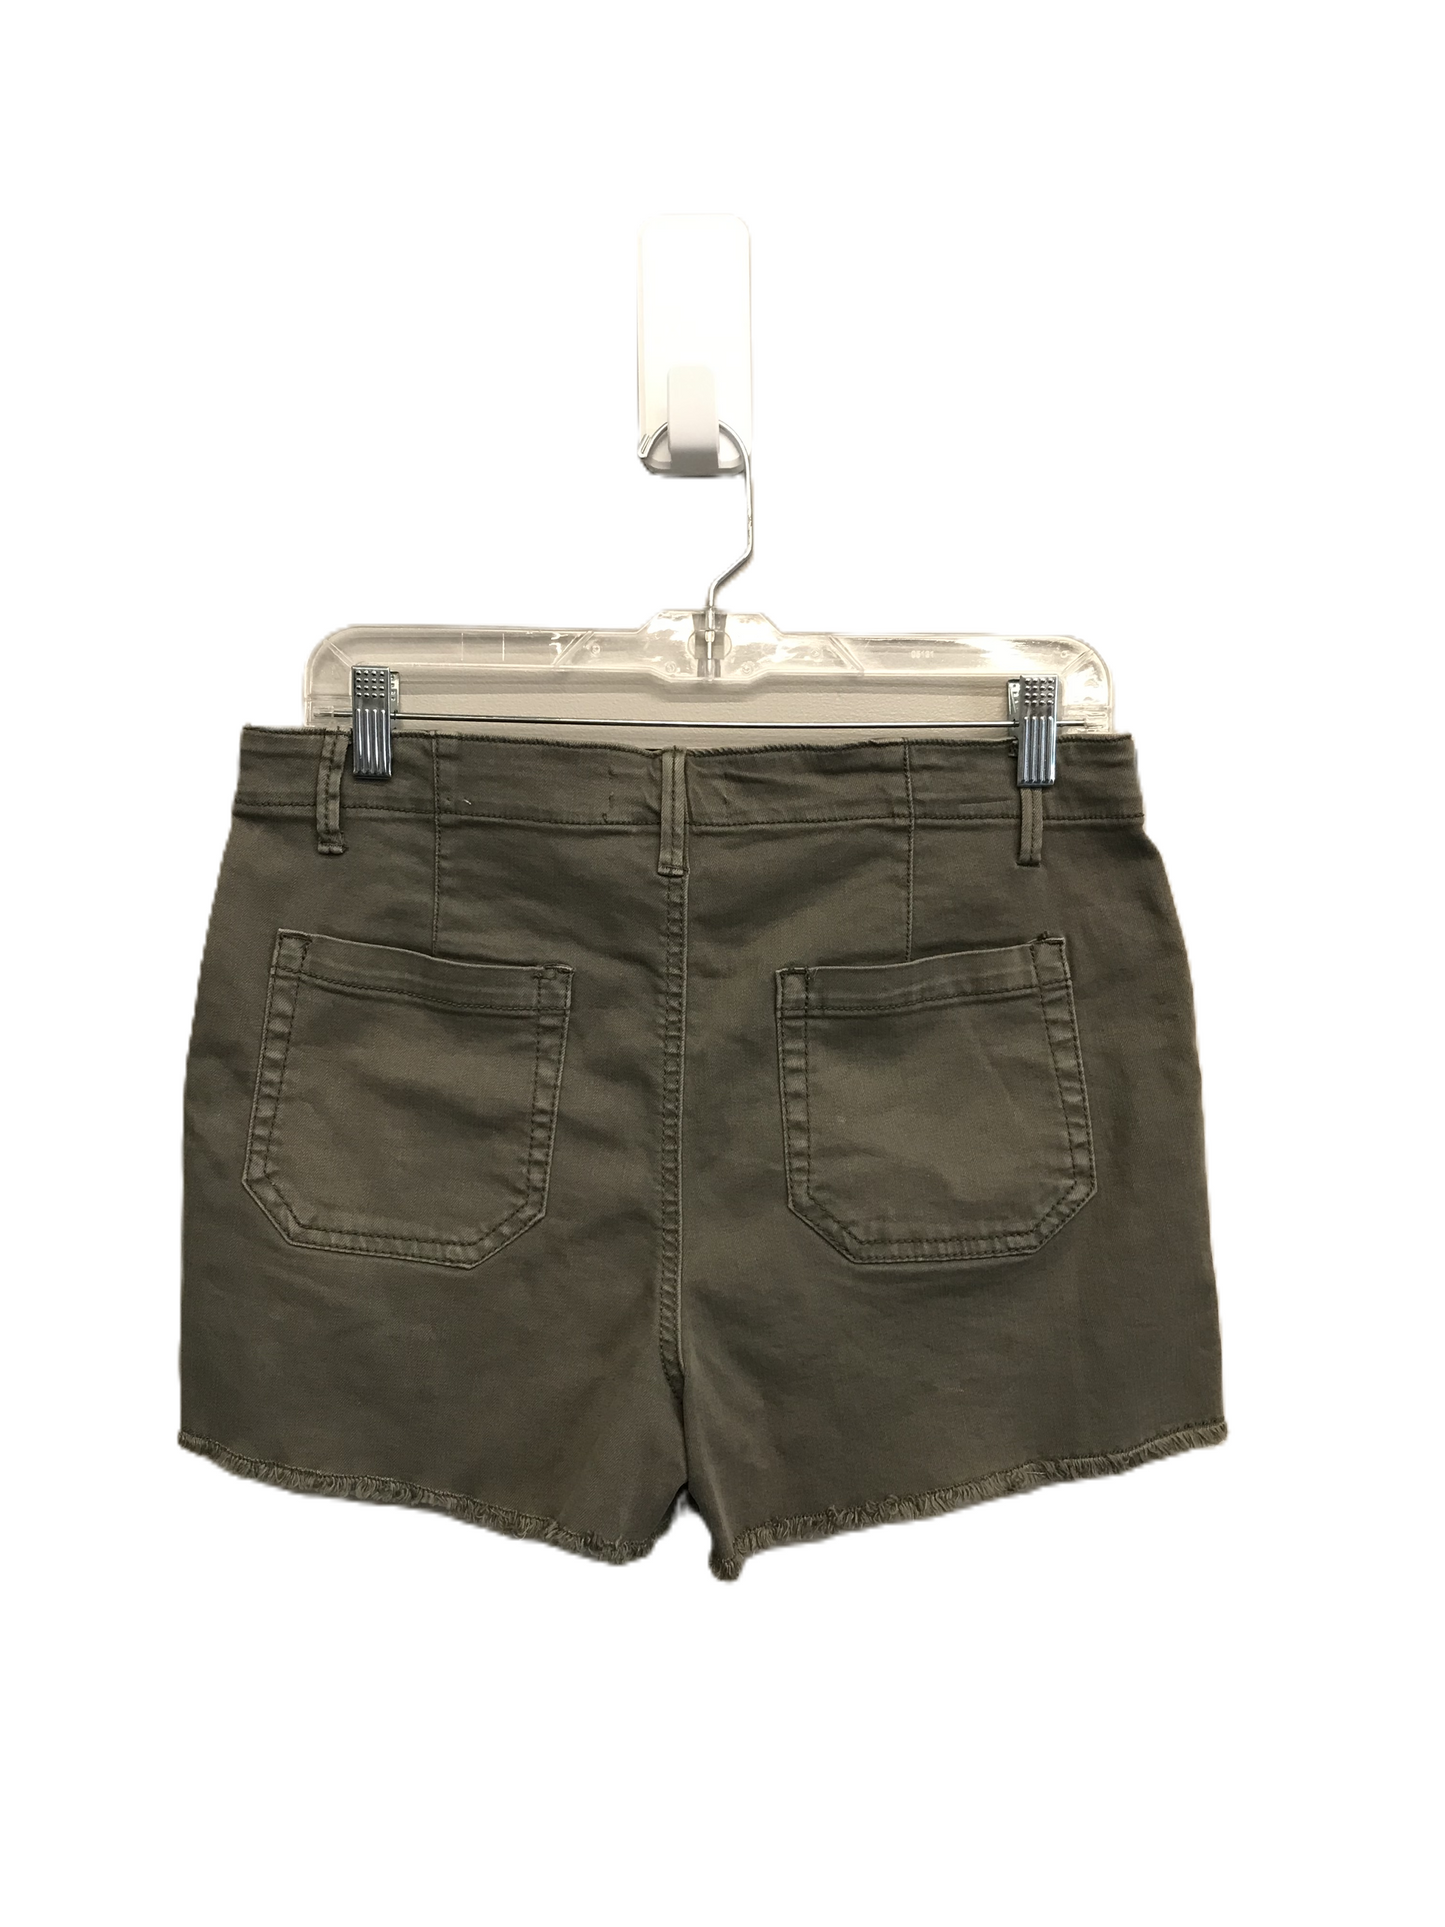 Green Shorts By Knox Rose, Size: 8